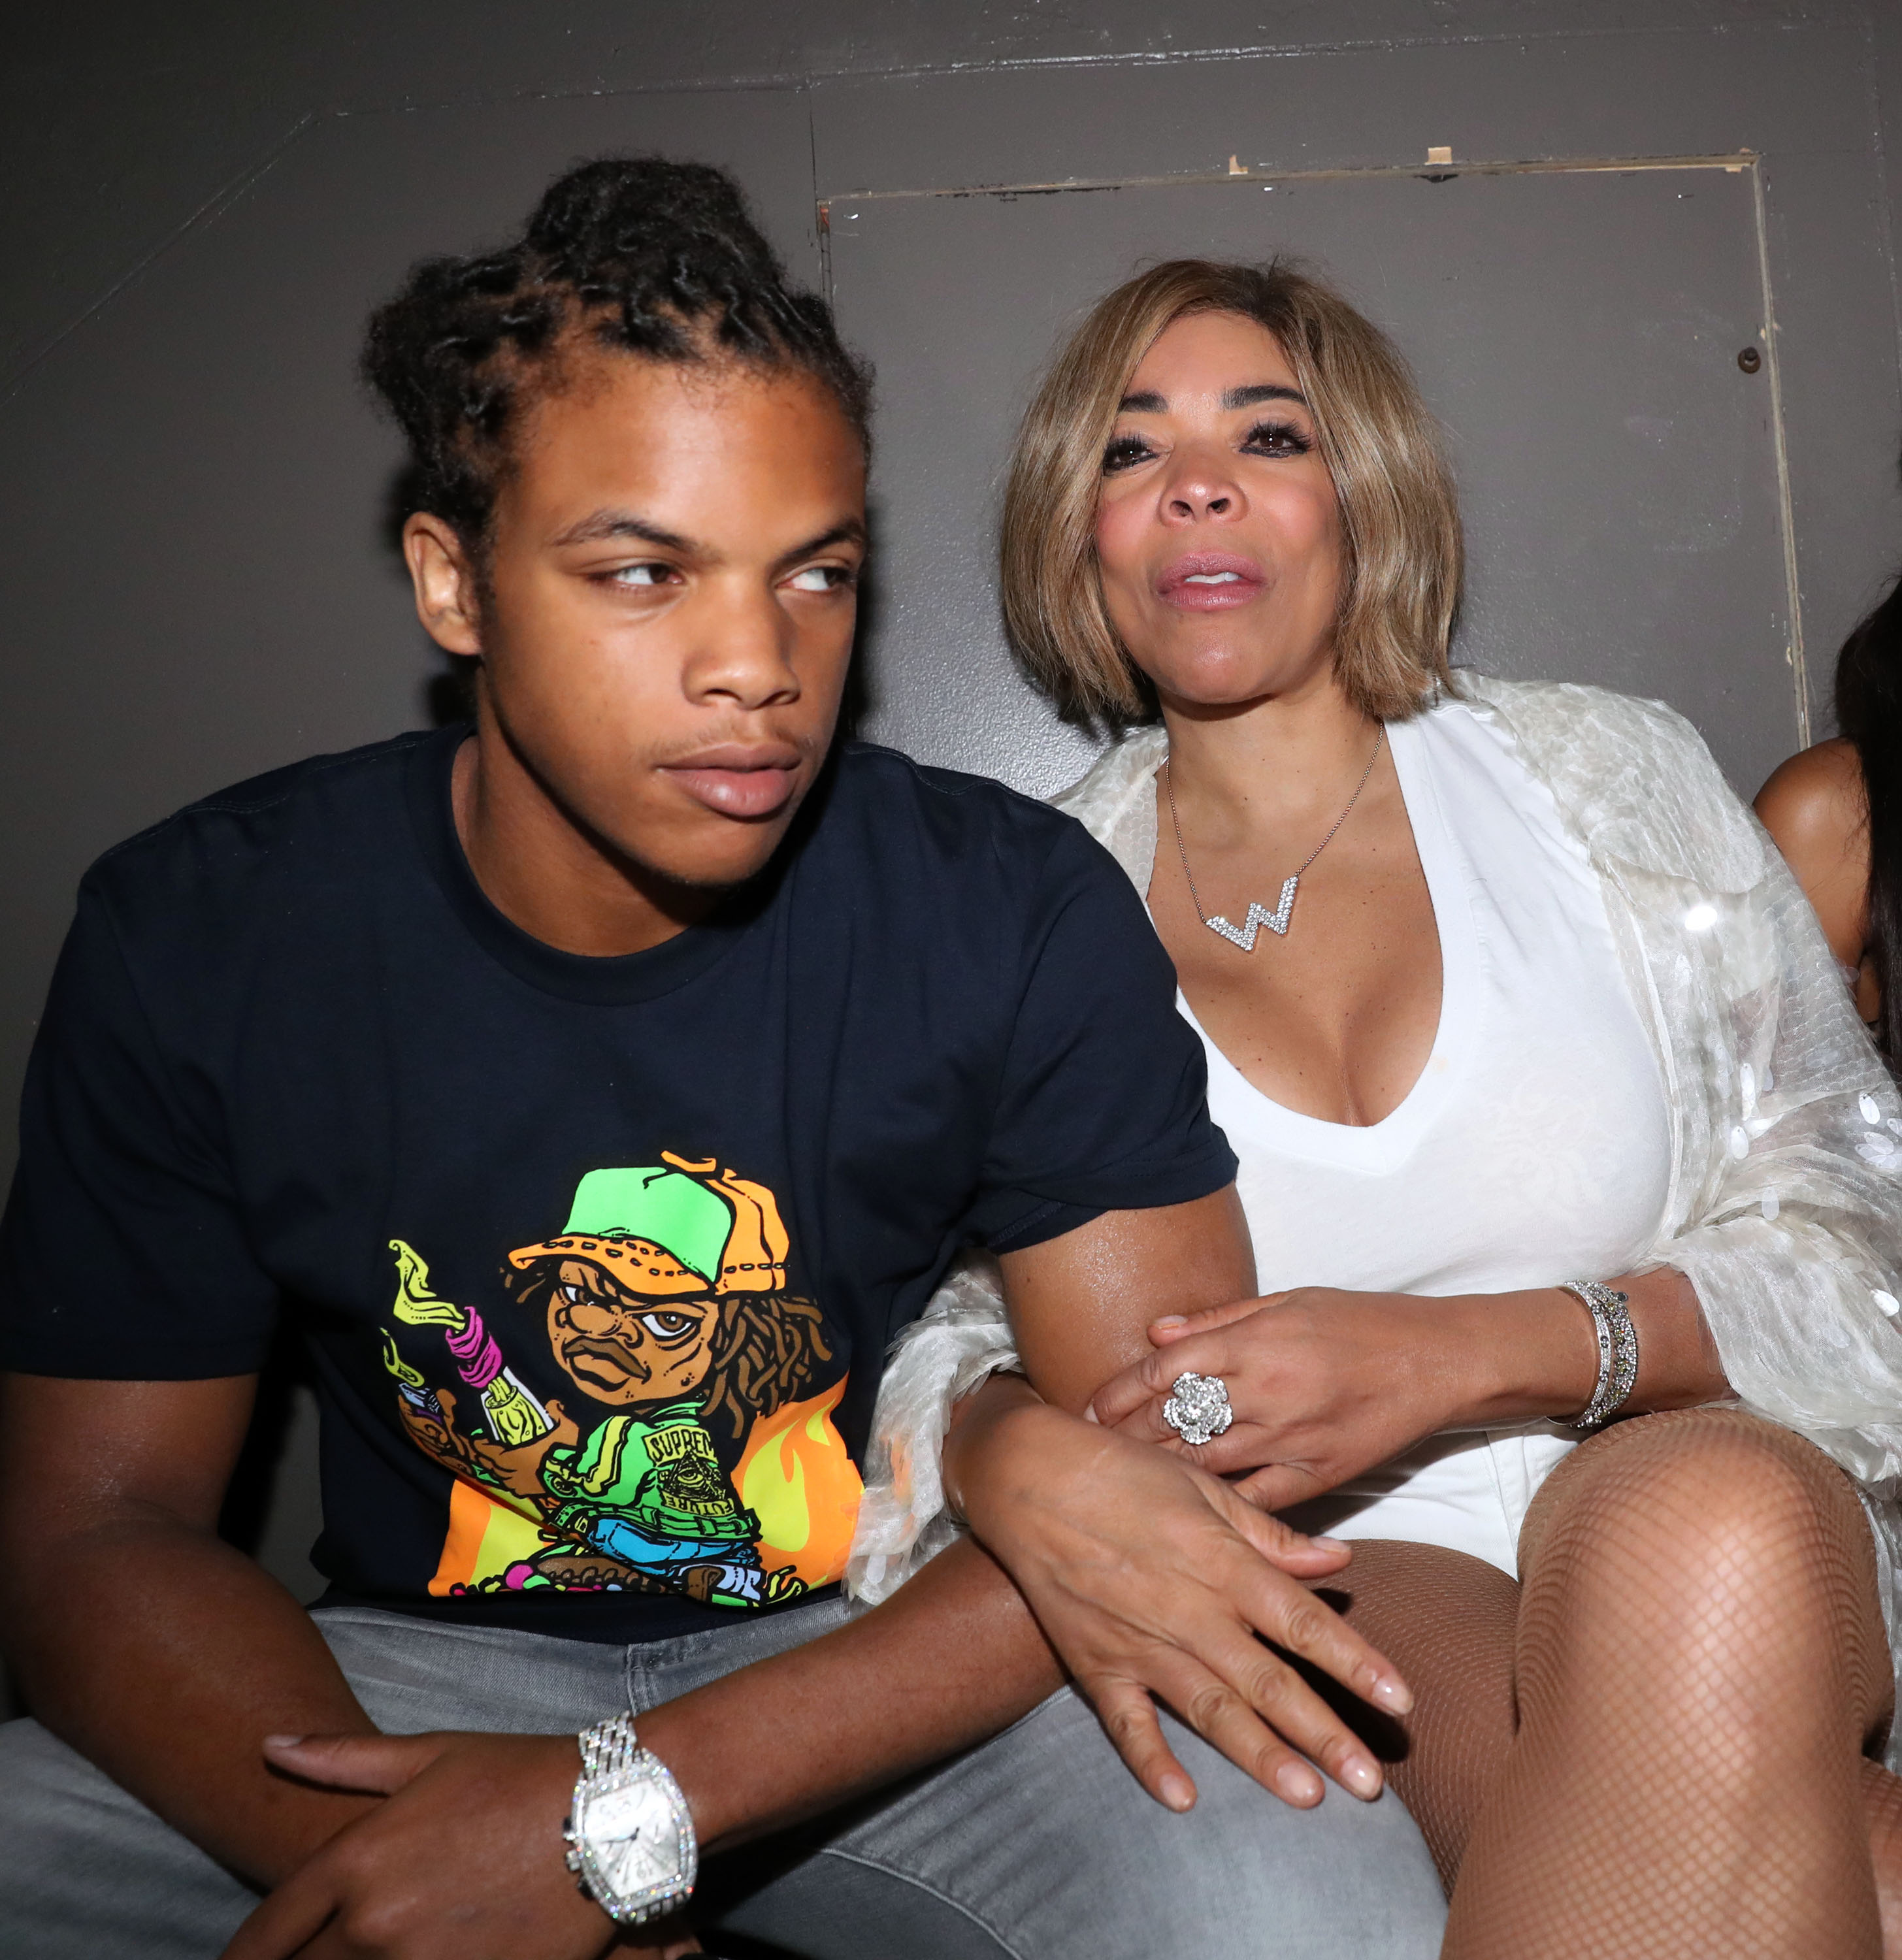 Kevin Hunter Jr. and Wendy Williams at the Jeezy "TM 104" Listening Party on August 20, 2019, in New York City | Source: Getty Images